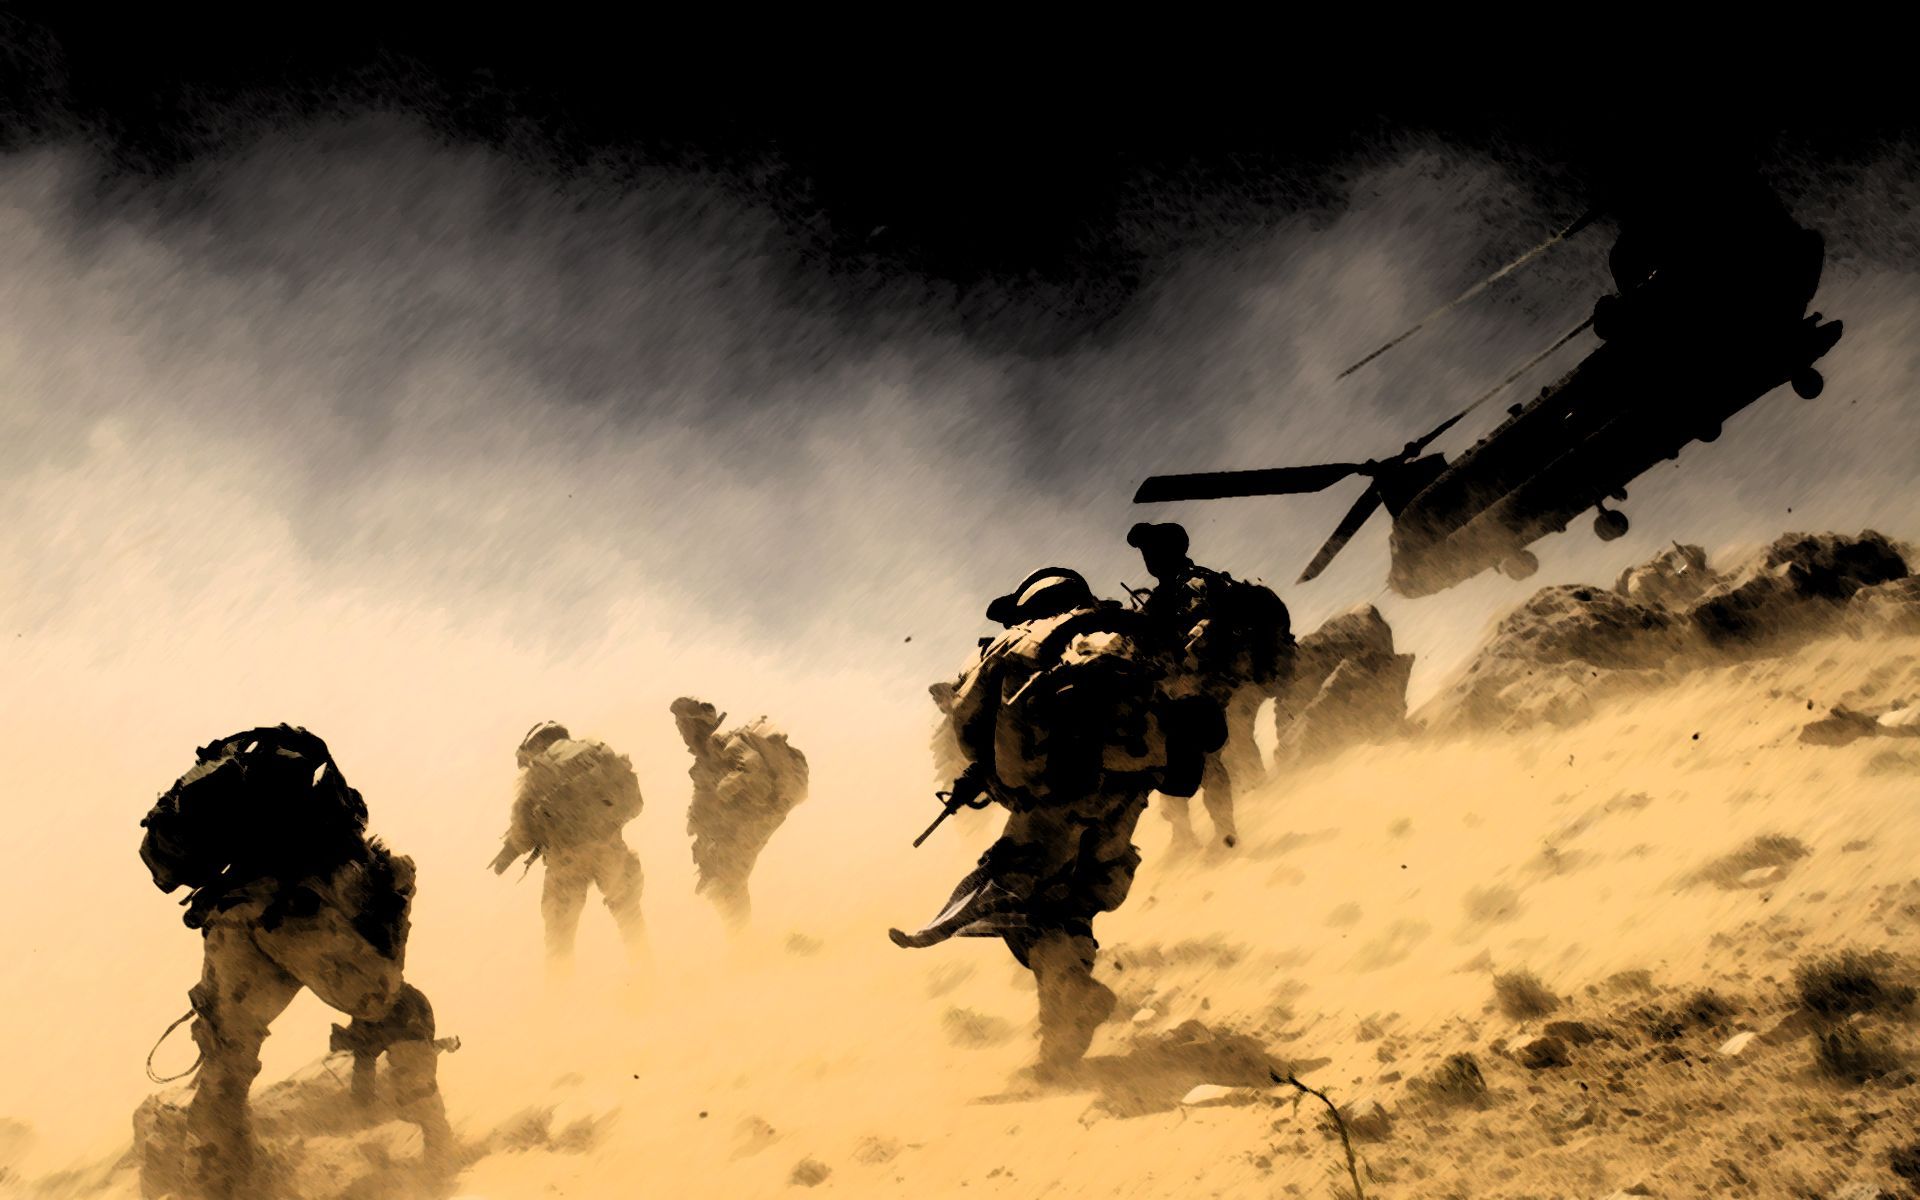 Top Warzone Background HD Wallpaper. Military wallpaper, Army wallpaper, Military soldiers